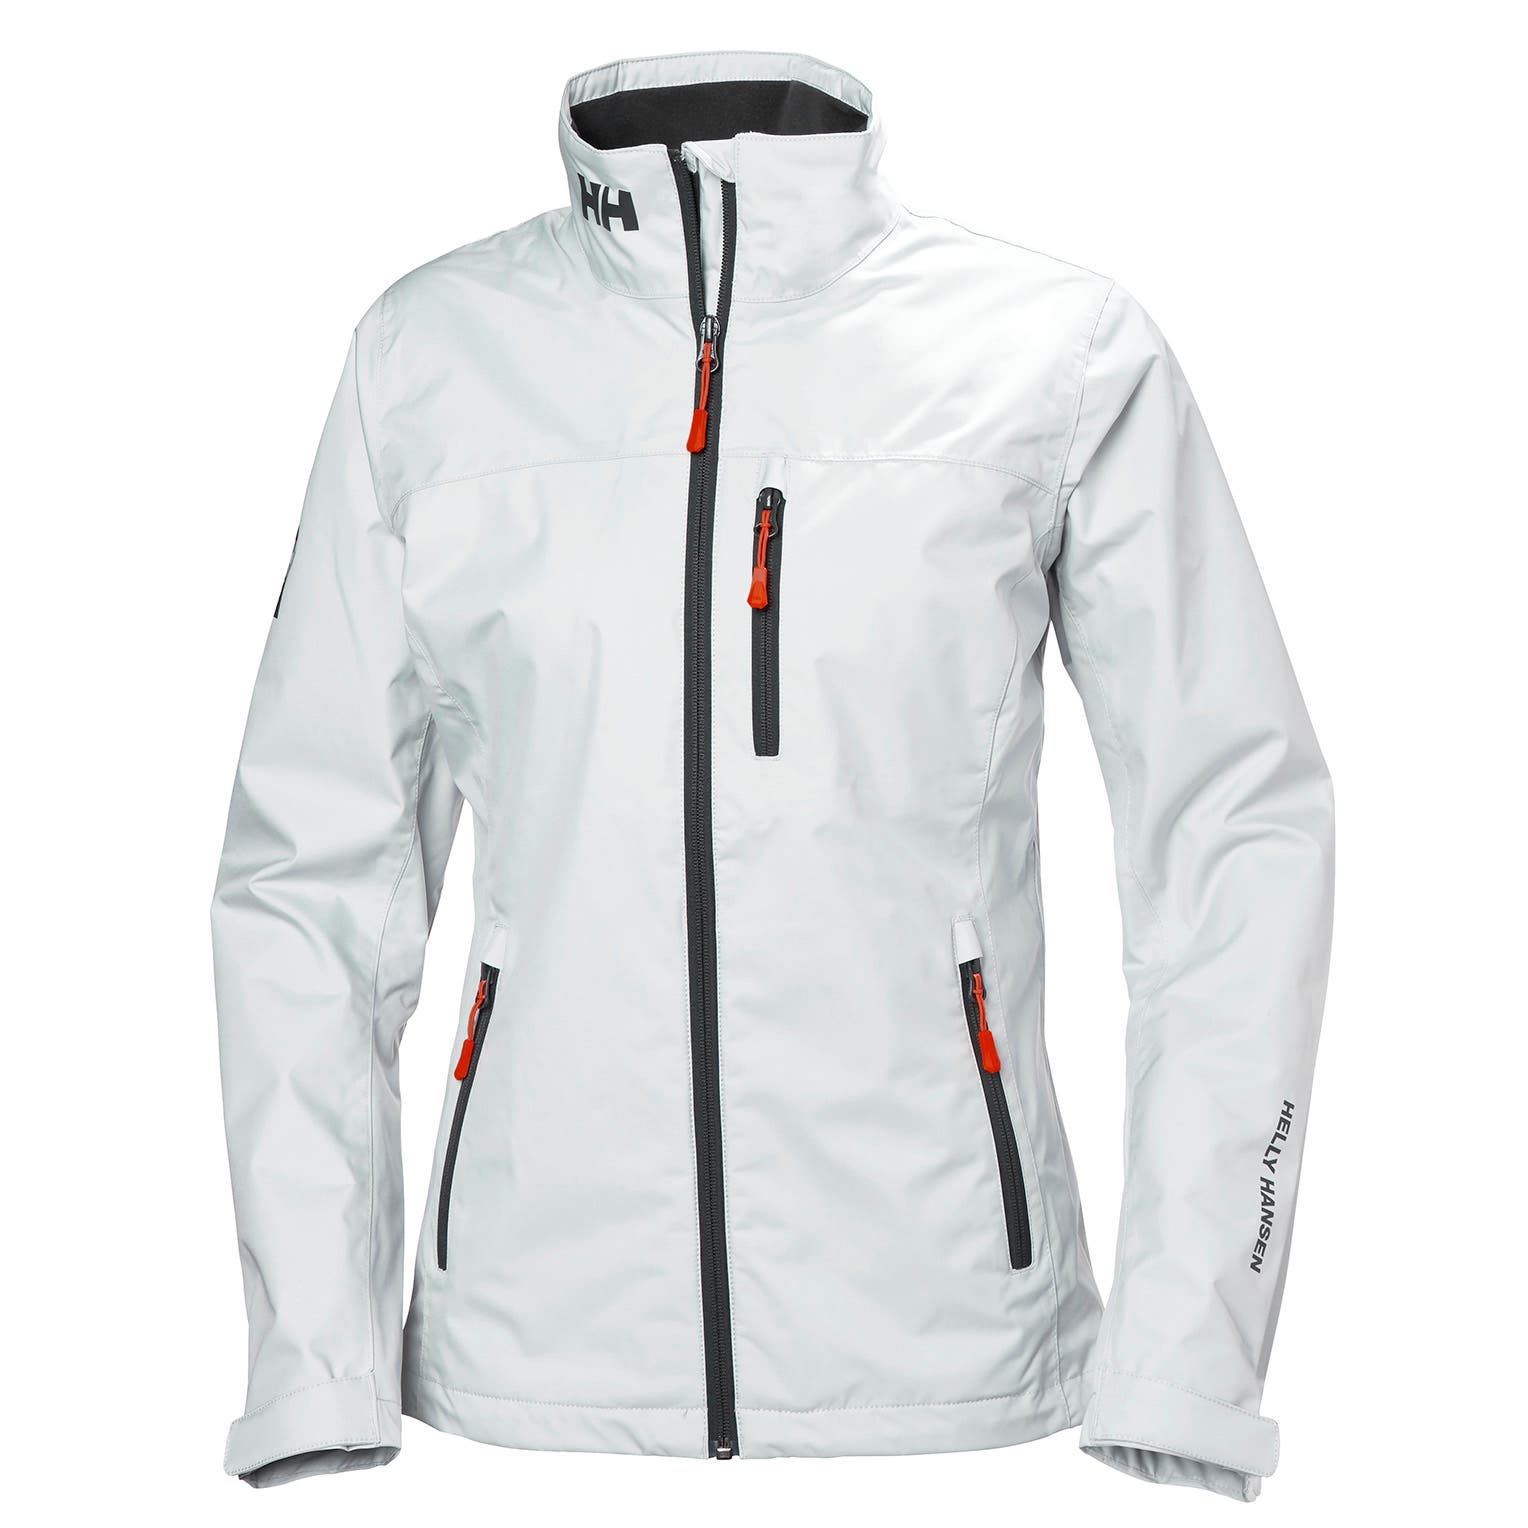 Helly Hansen Women's Crew Midlayer Jacket in White from the front